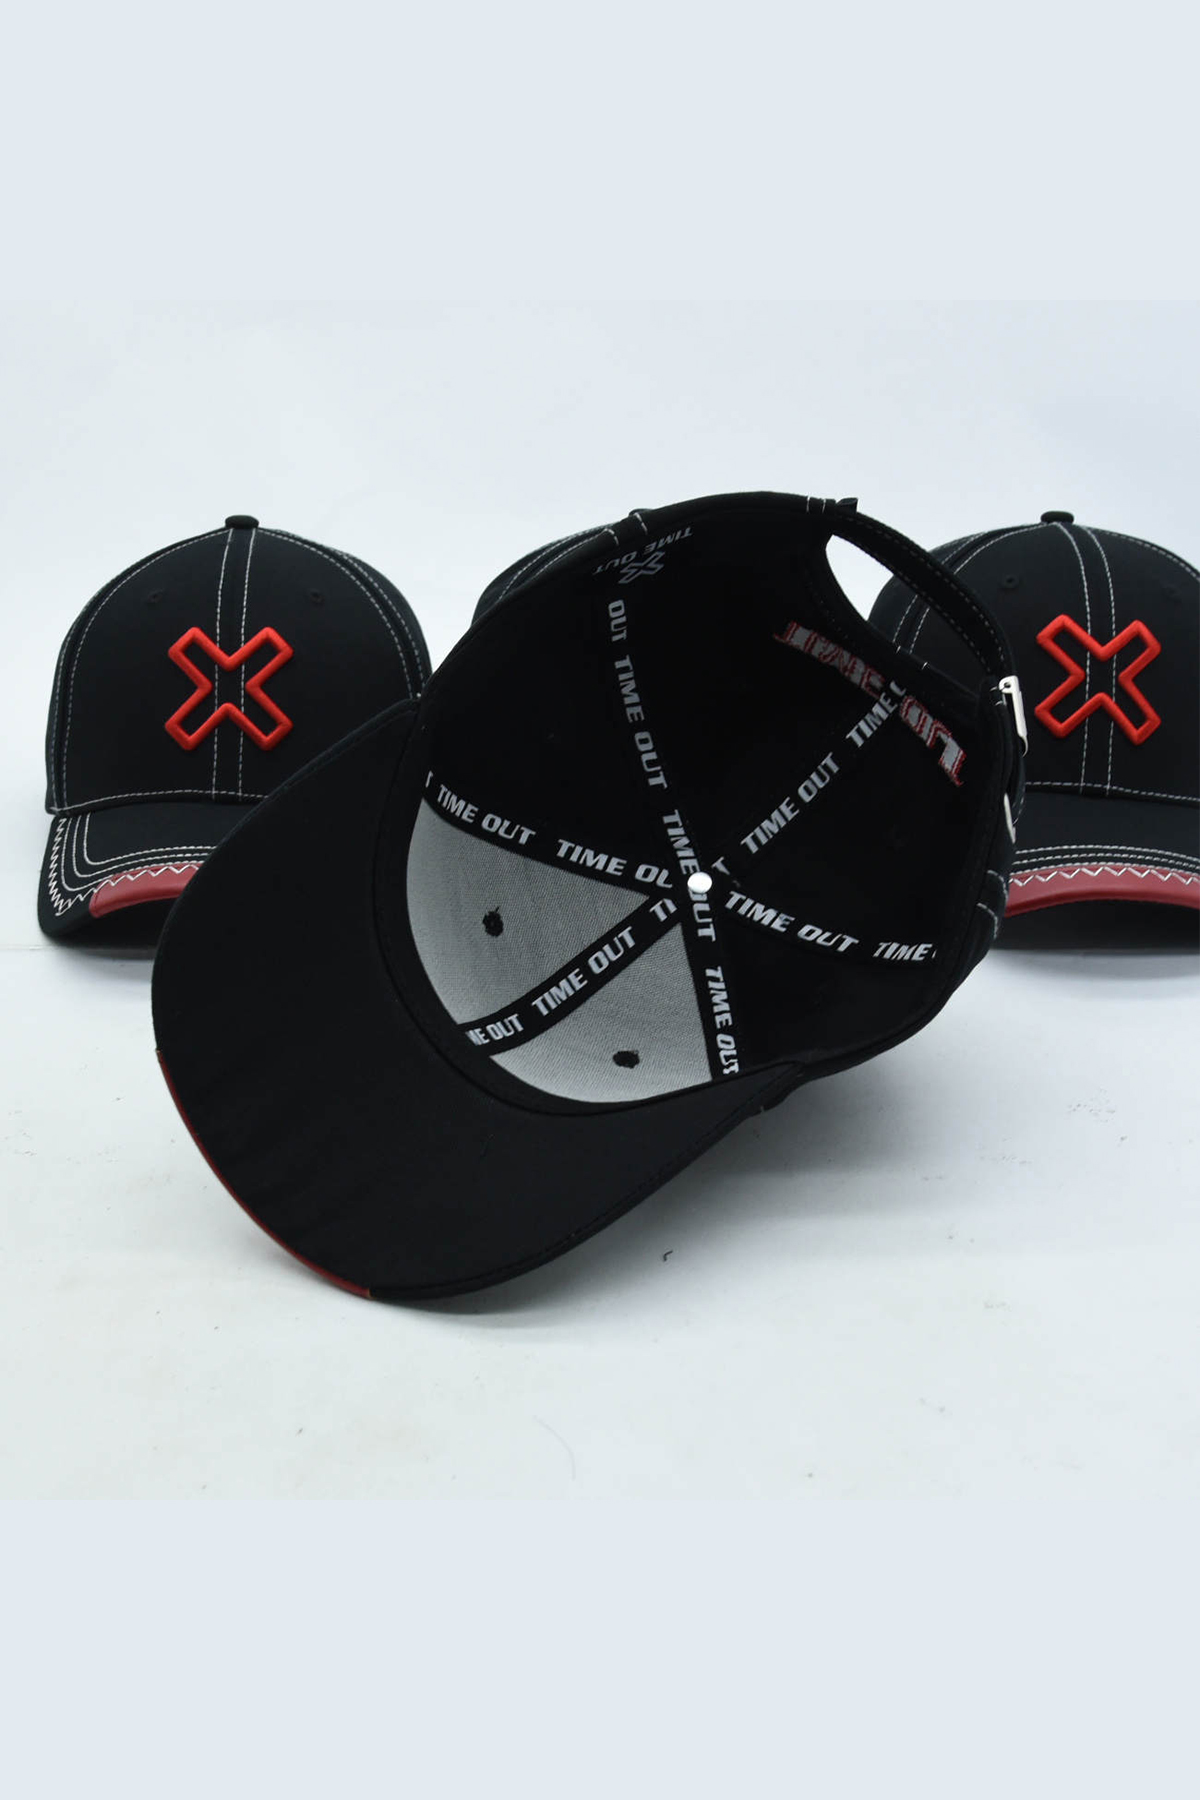 Time-Out-X-Cotton-Gym-Cap-Black-with-Red-logo—inside